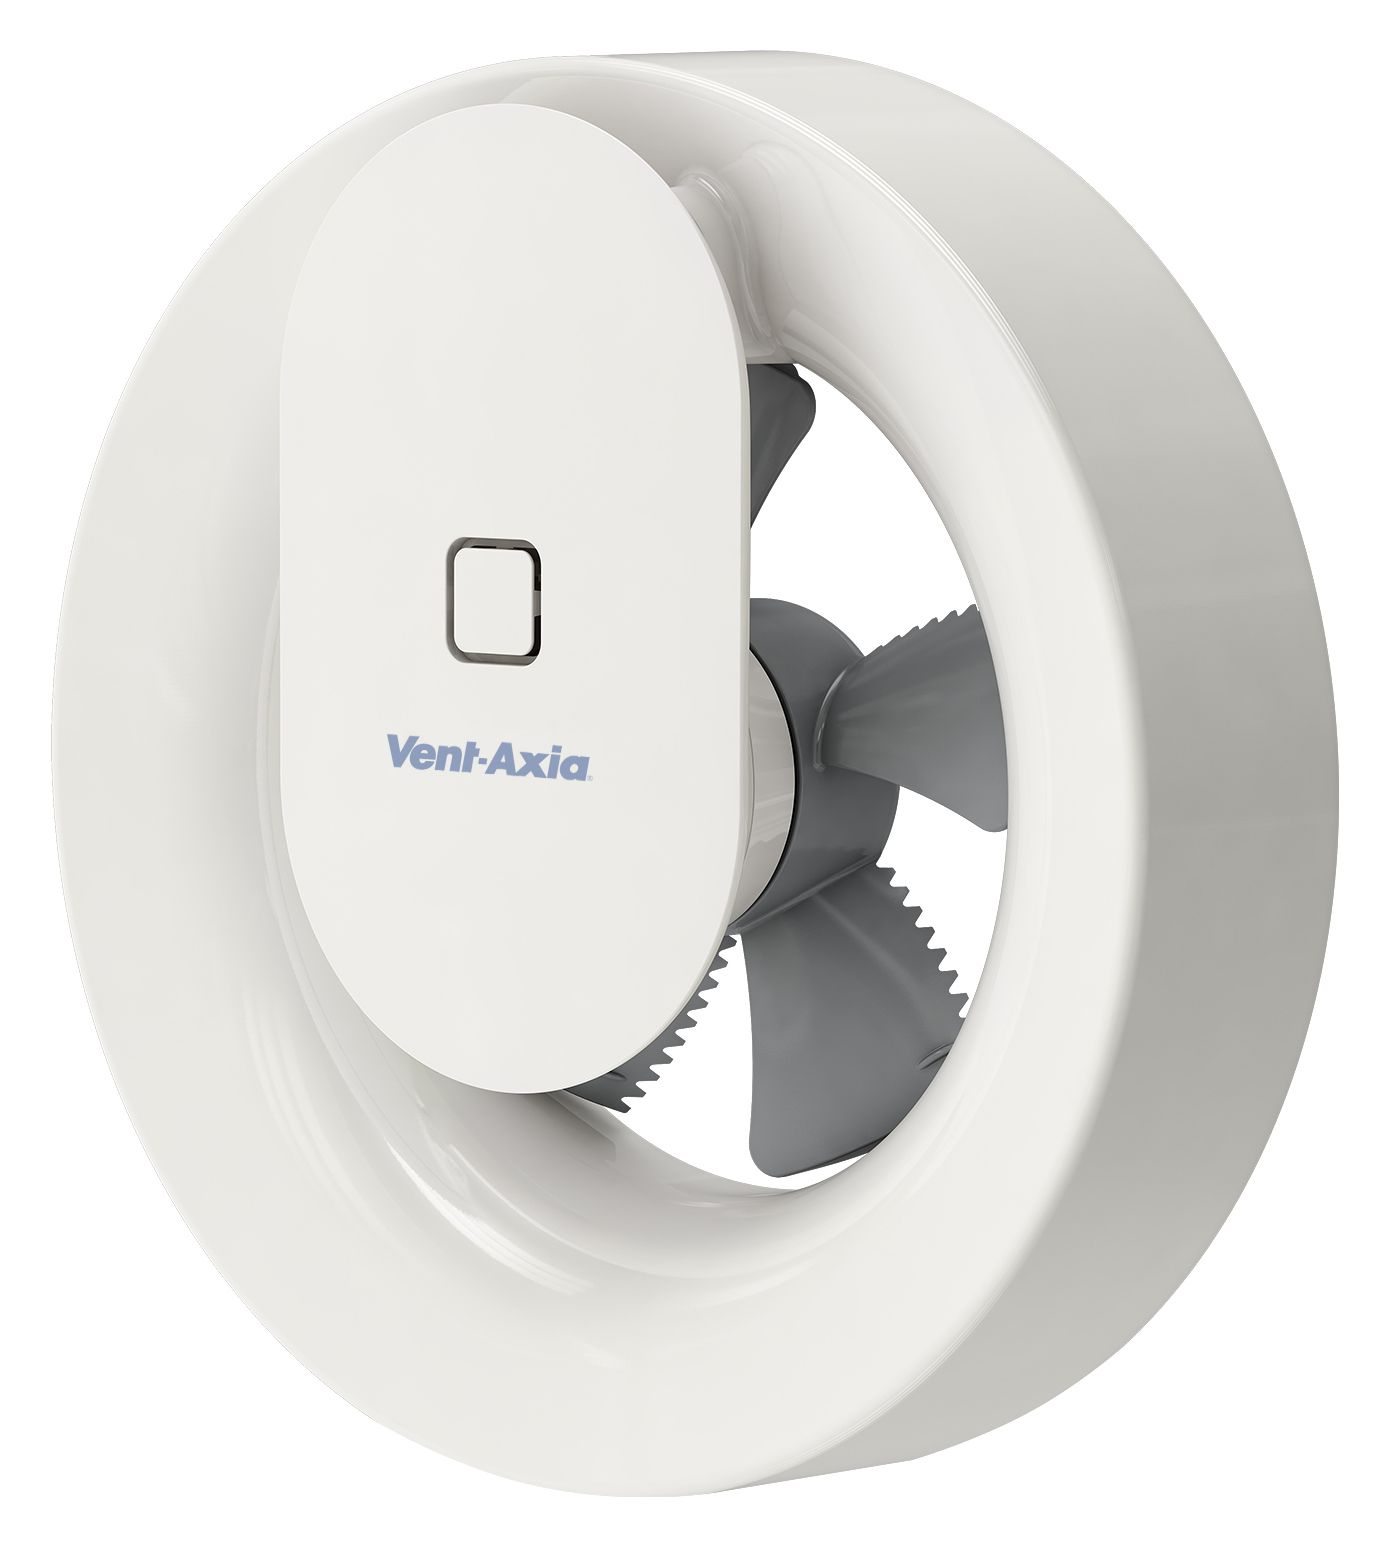 Image of Vent-Axia Svara White Lo Carbon Bathroom Fan with Bluetooth Control - 100mm